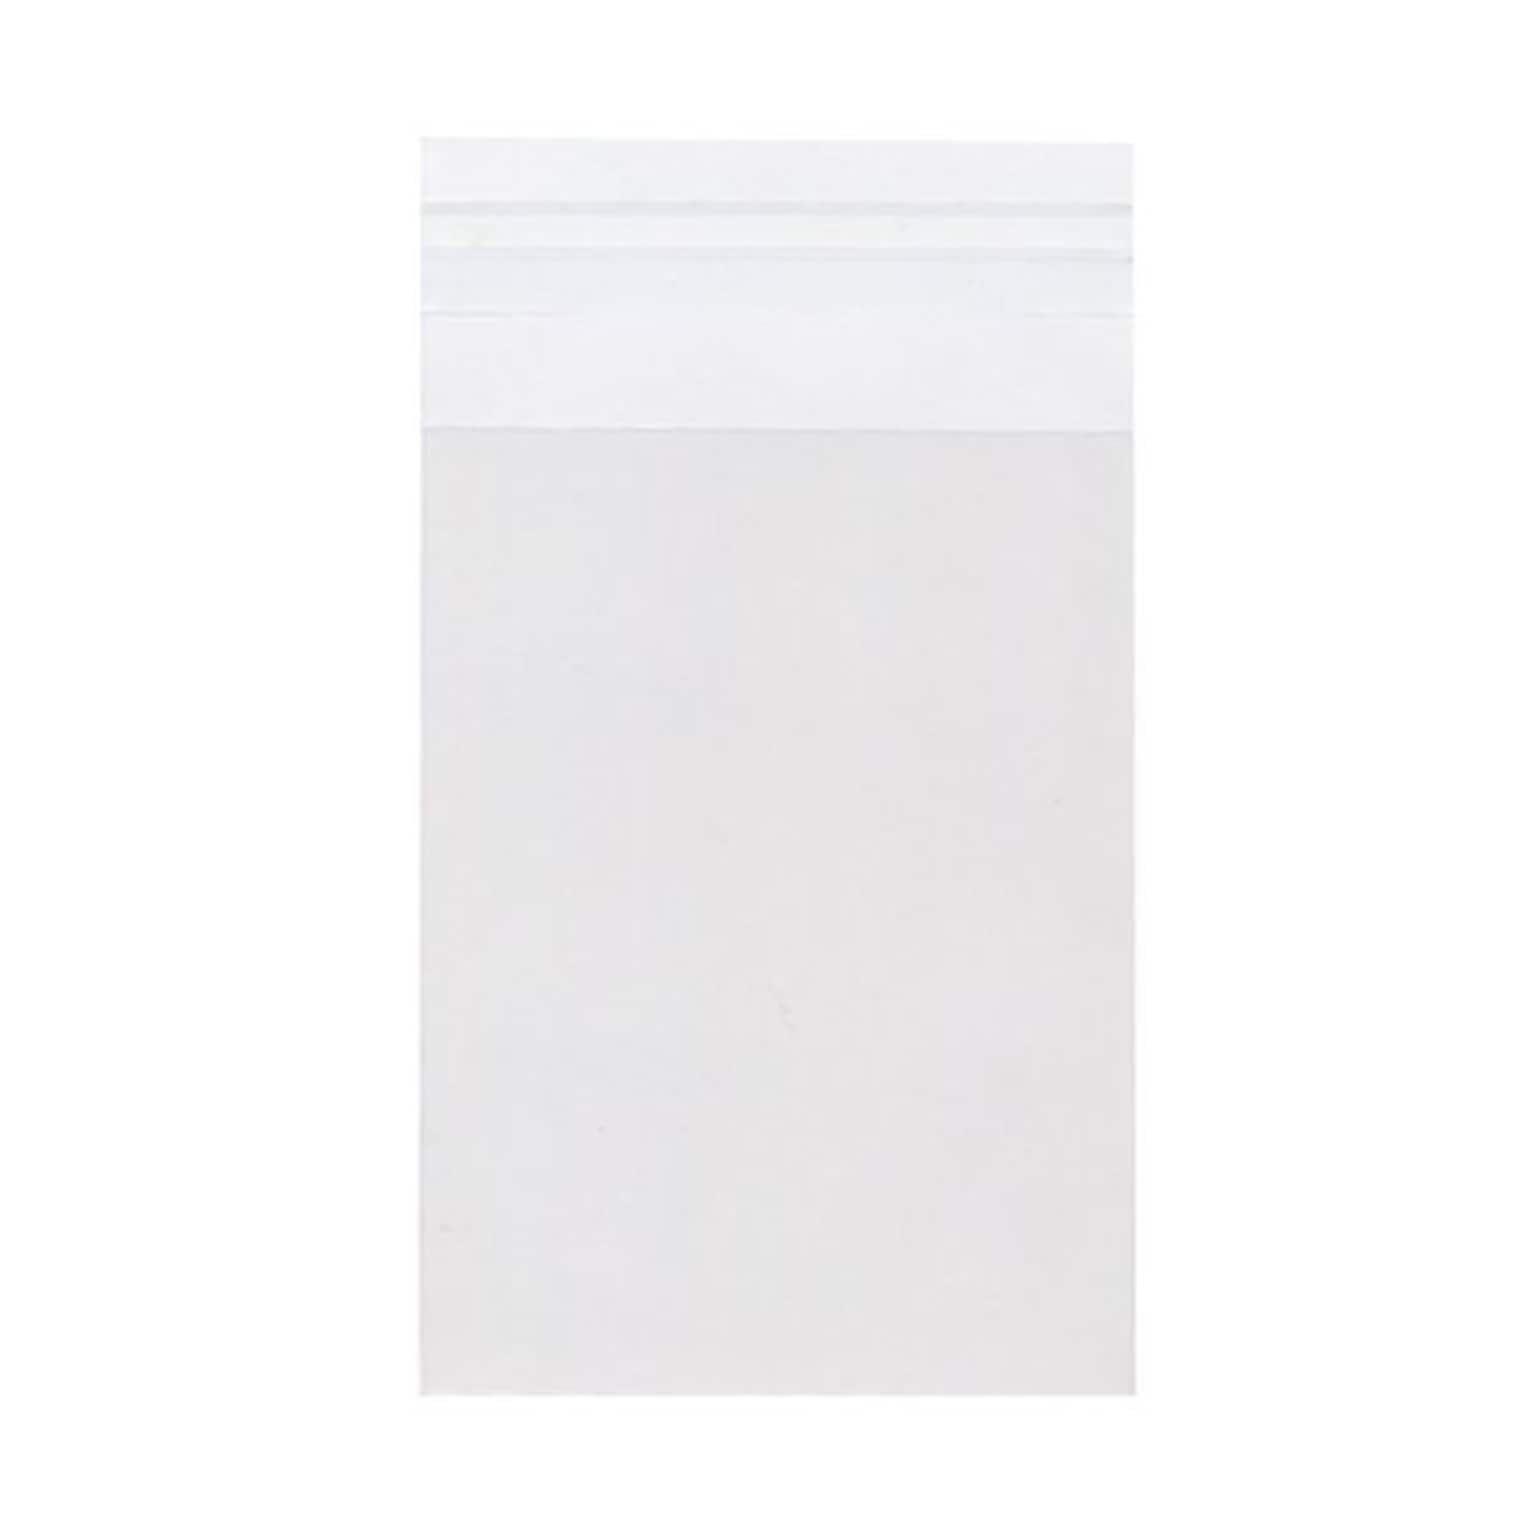 JAM Paper Cello Sleeves with Self-Adhesive Closure, 4Bar A1, 3.8125 x 5.1875, Clear, 1000/Carton (4BARCELLOB)